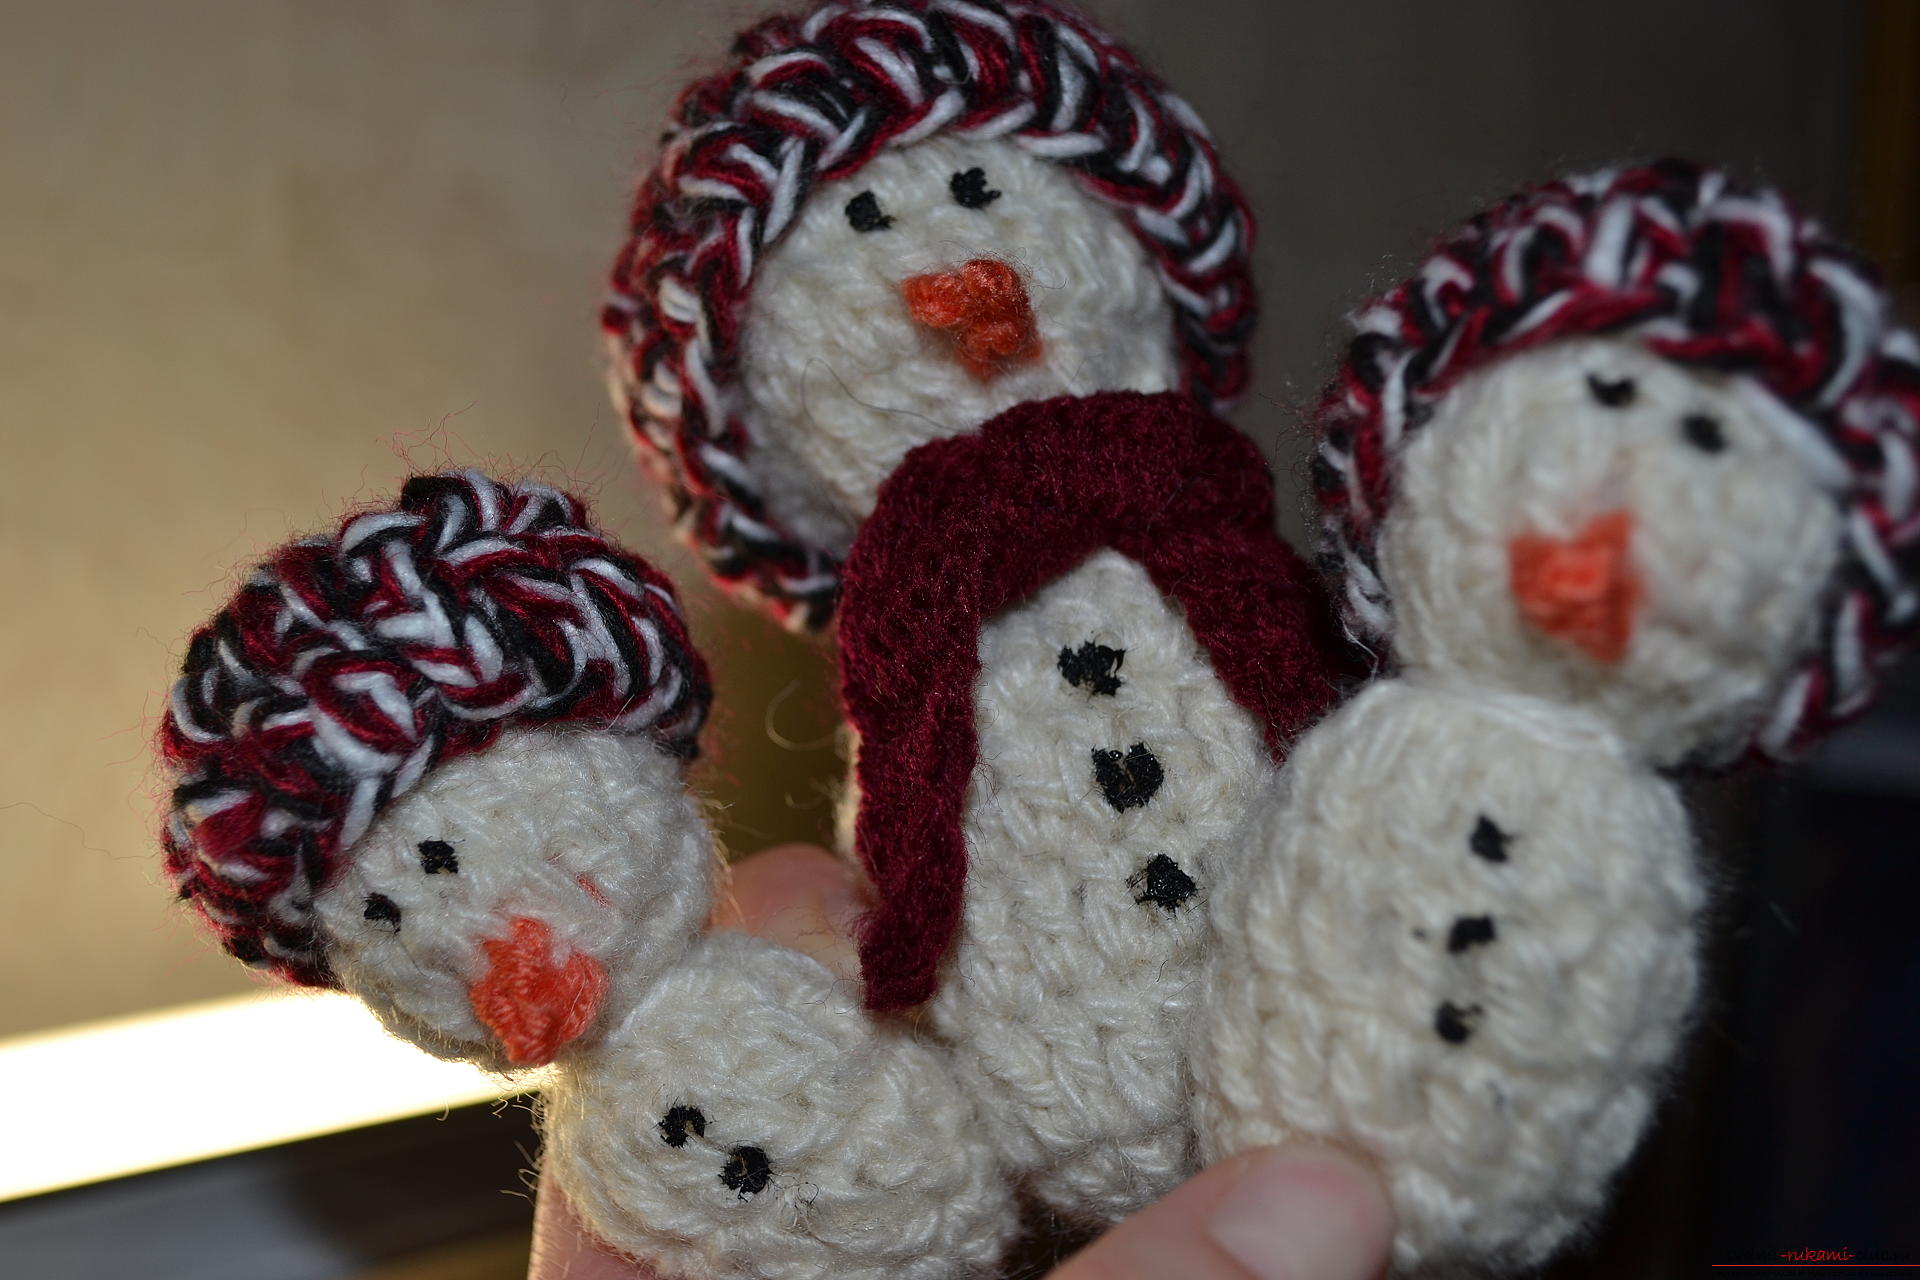 A master class with a photo and description will teach the crocheting of a snowman, which will be understandable for beginners. Photo №13